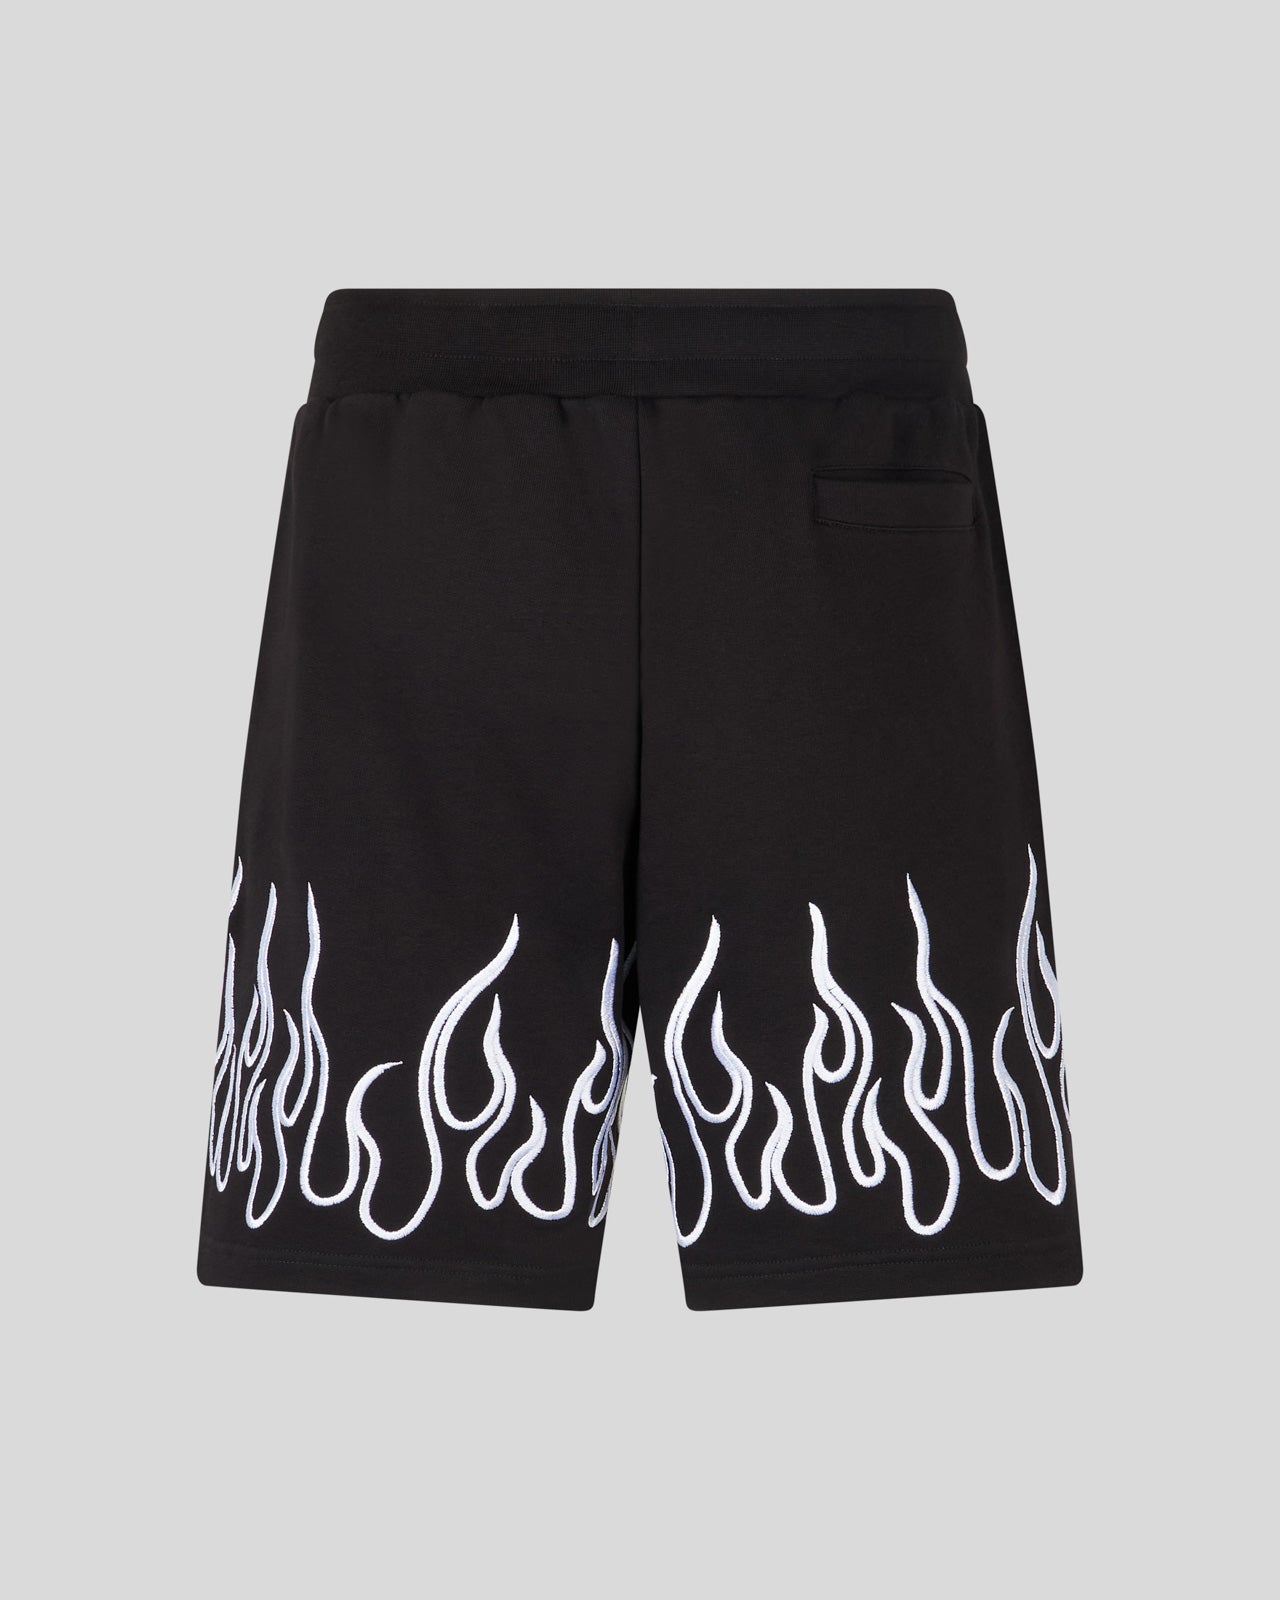 BLACK SHORTS WITH EMBROIDERED WHITE FLAMES